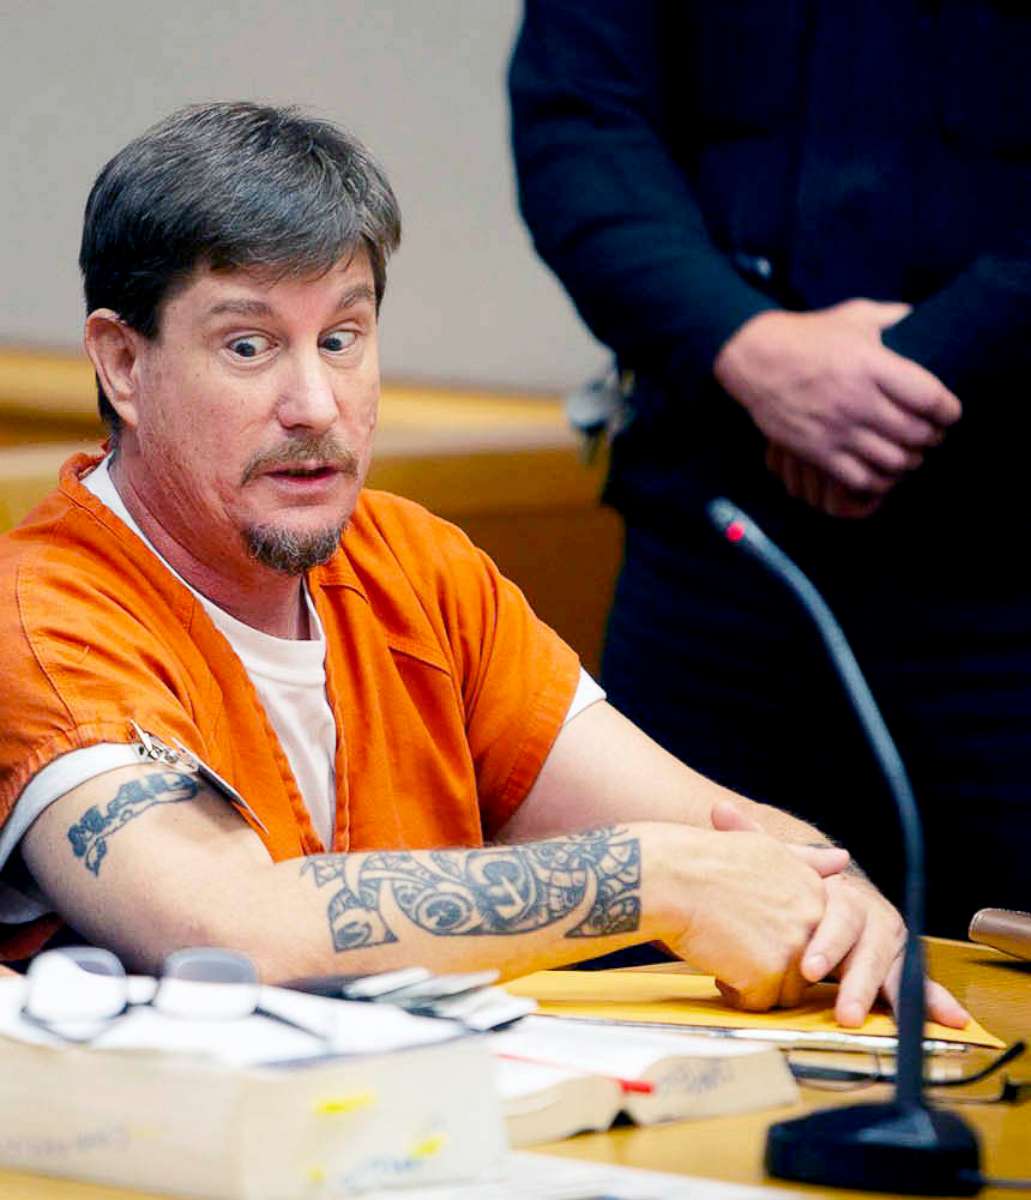 PHOTO: Michael Drejka is seen in a Clearwater courtroom after being sentenced, Oct. 10, 2019 in Florida.